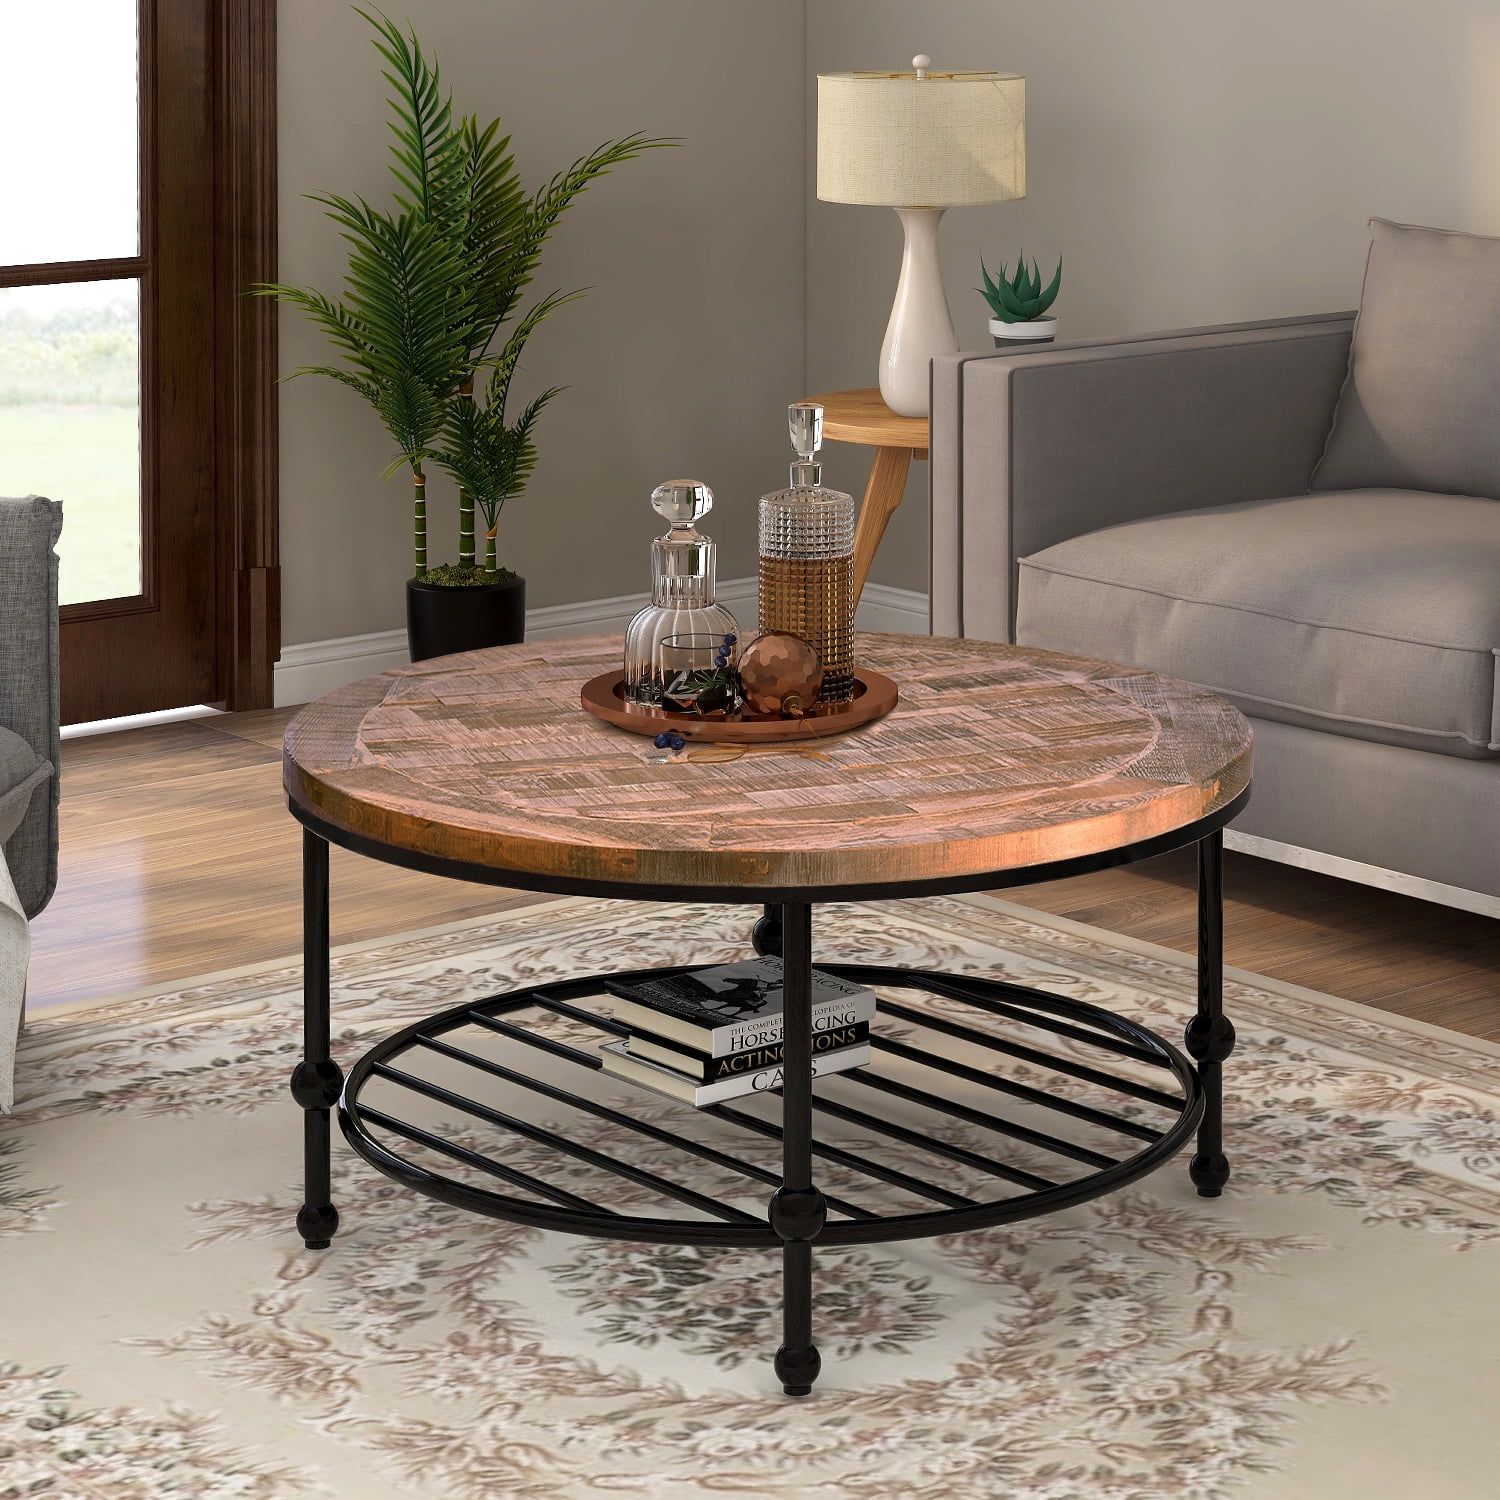 Rustic Natural Round Coffee Table With Storage Shelf For Living Room In Coffee Tables With Open Storage Shelves (View 9 of 20)